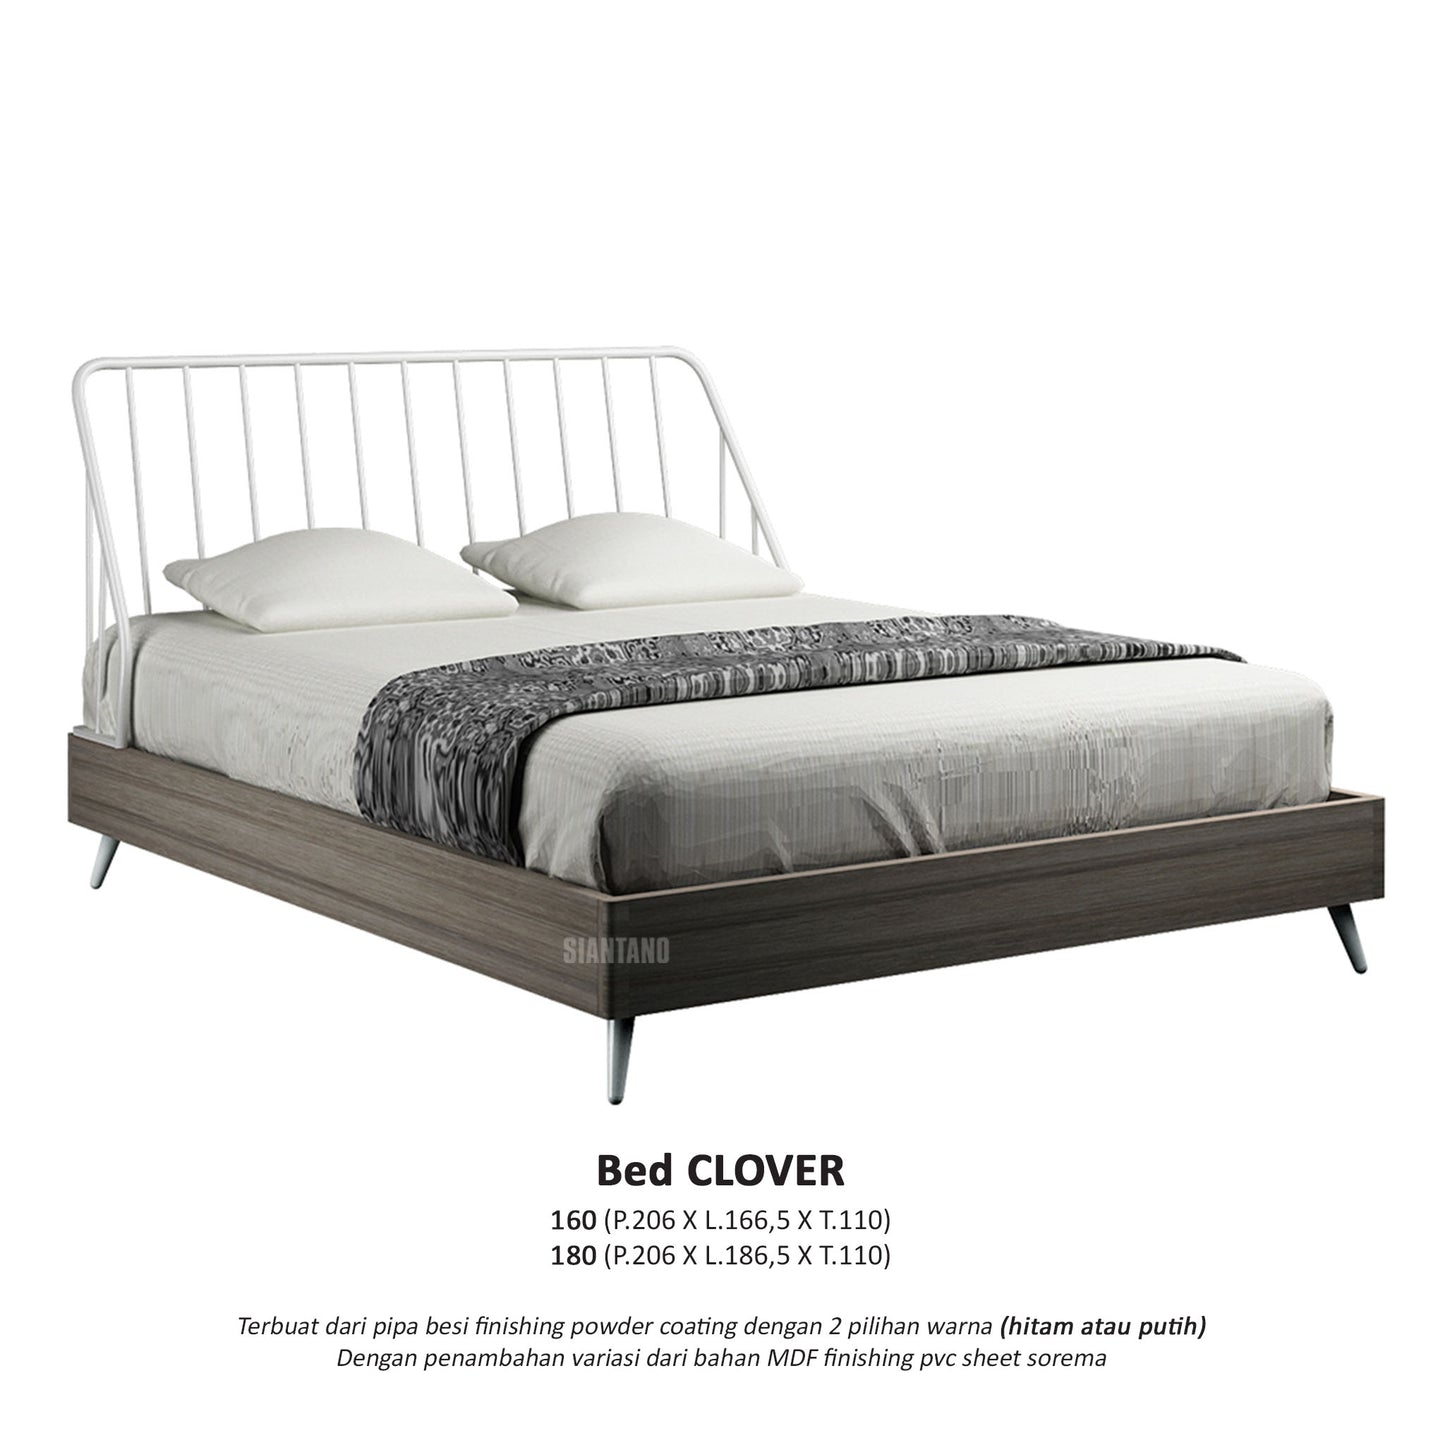 BED CLOVER